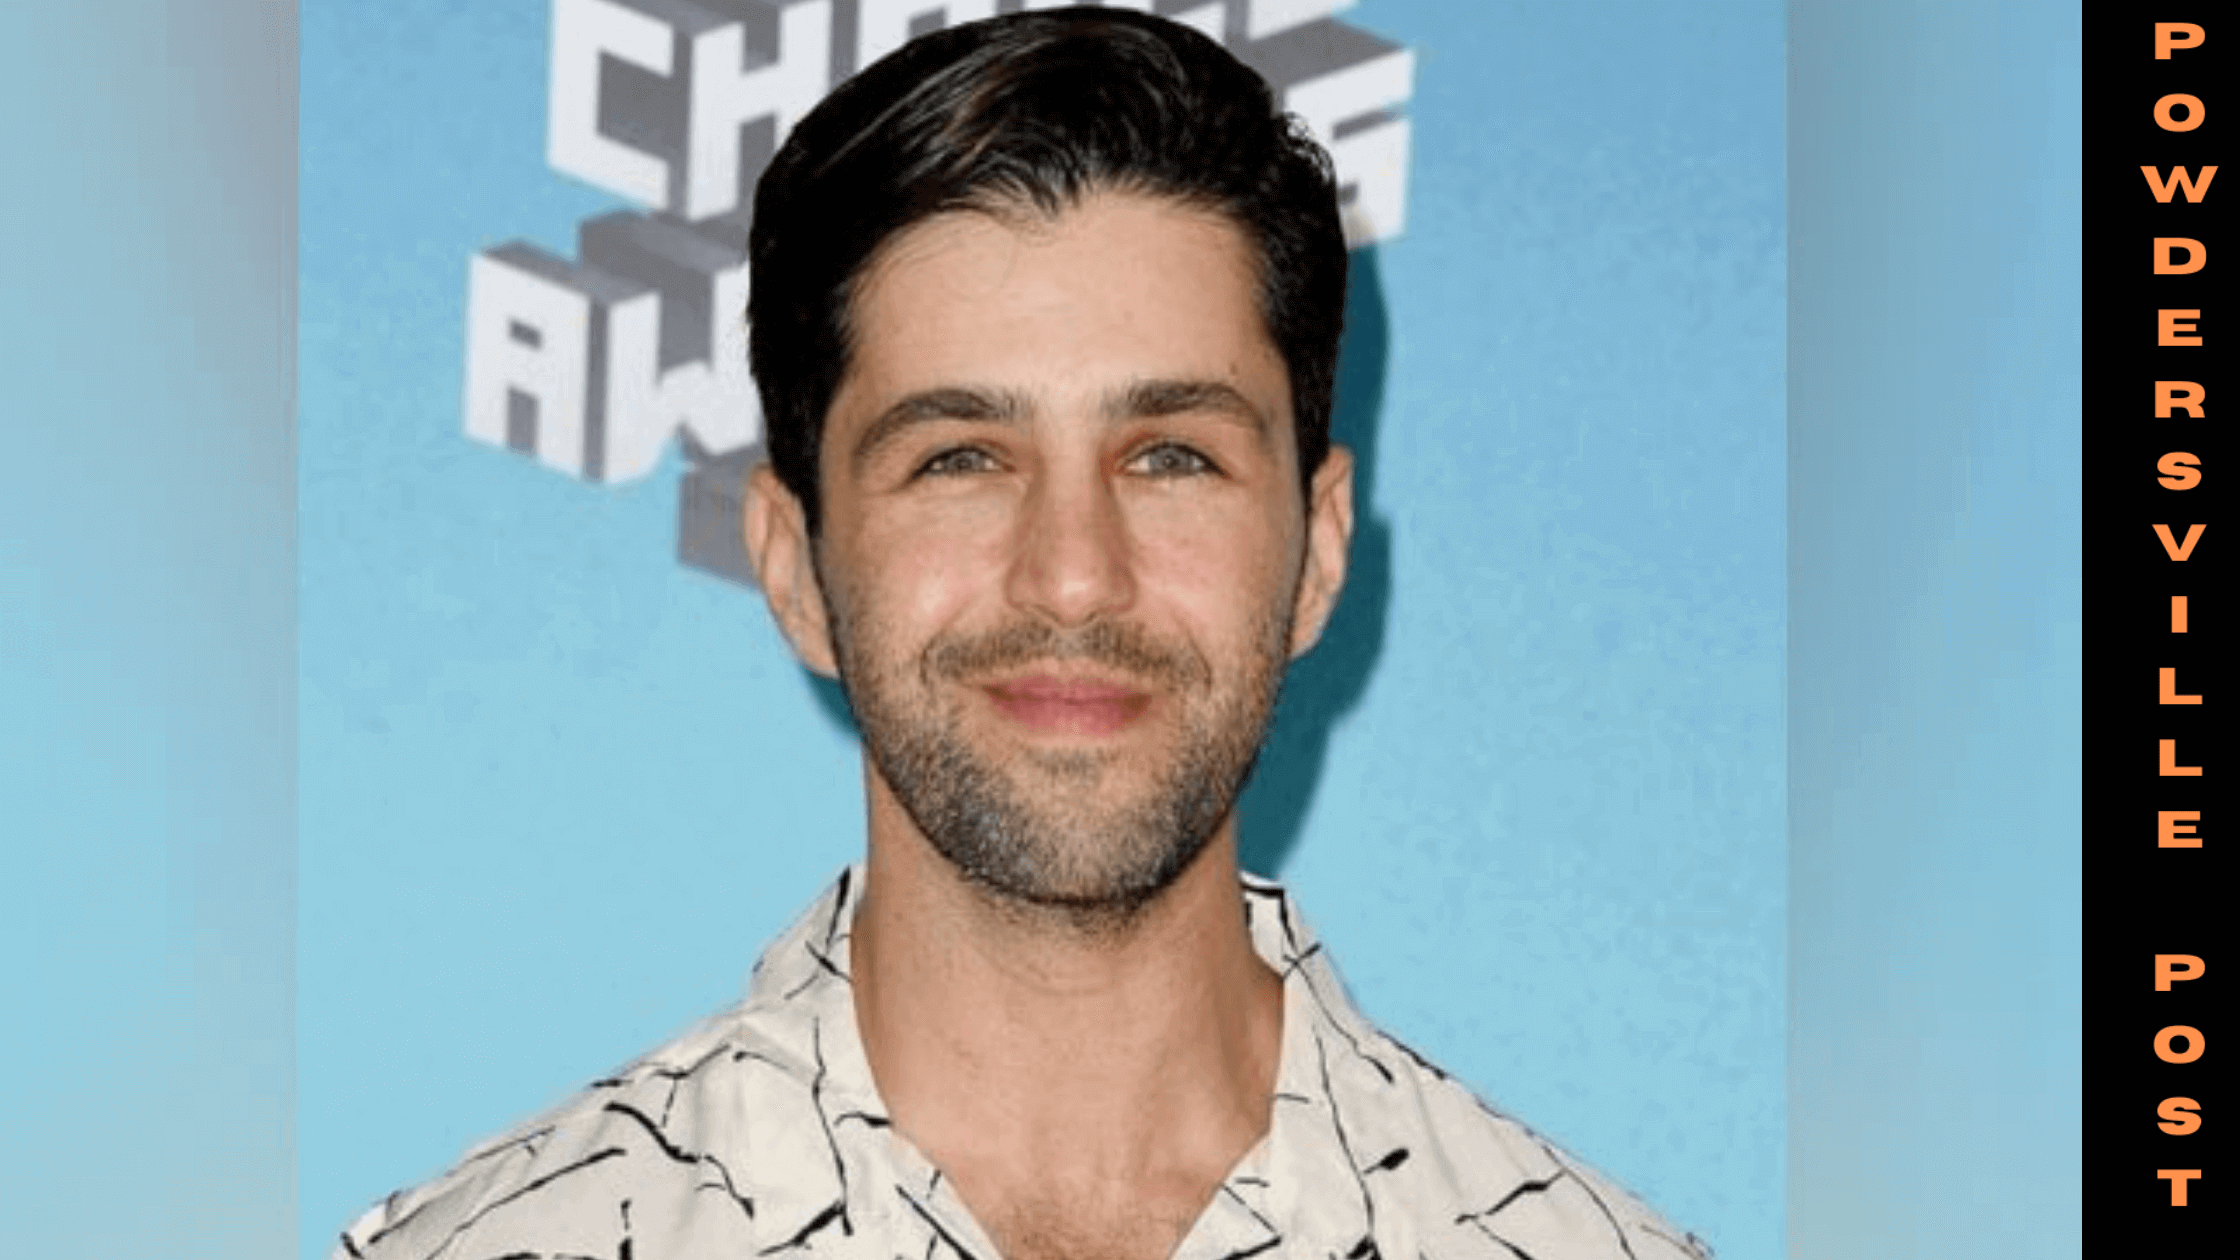 American Author Josh Peck's Book 'Happy People Are Annoying' Is Finally Revealed